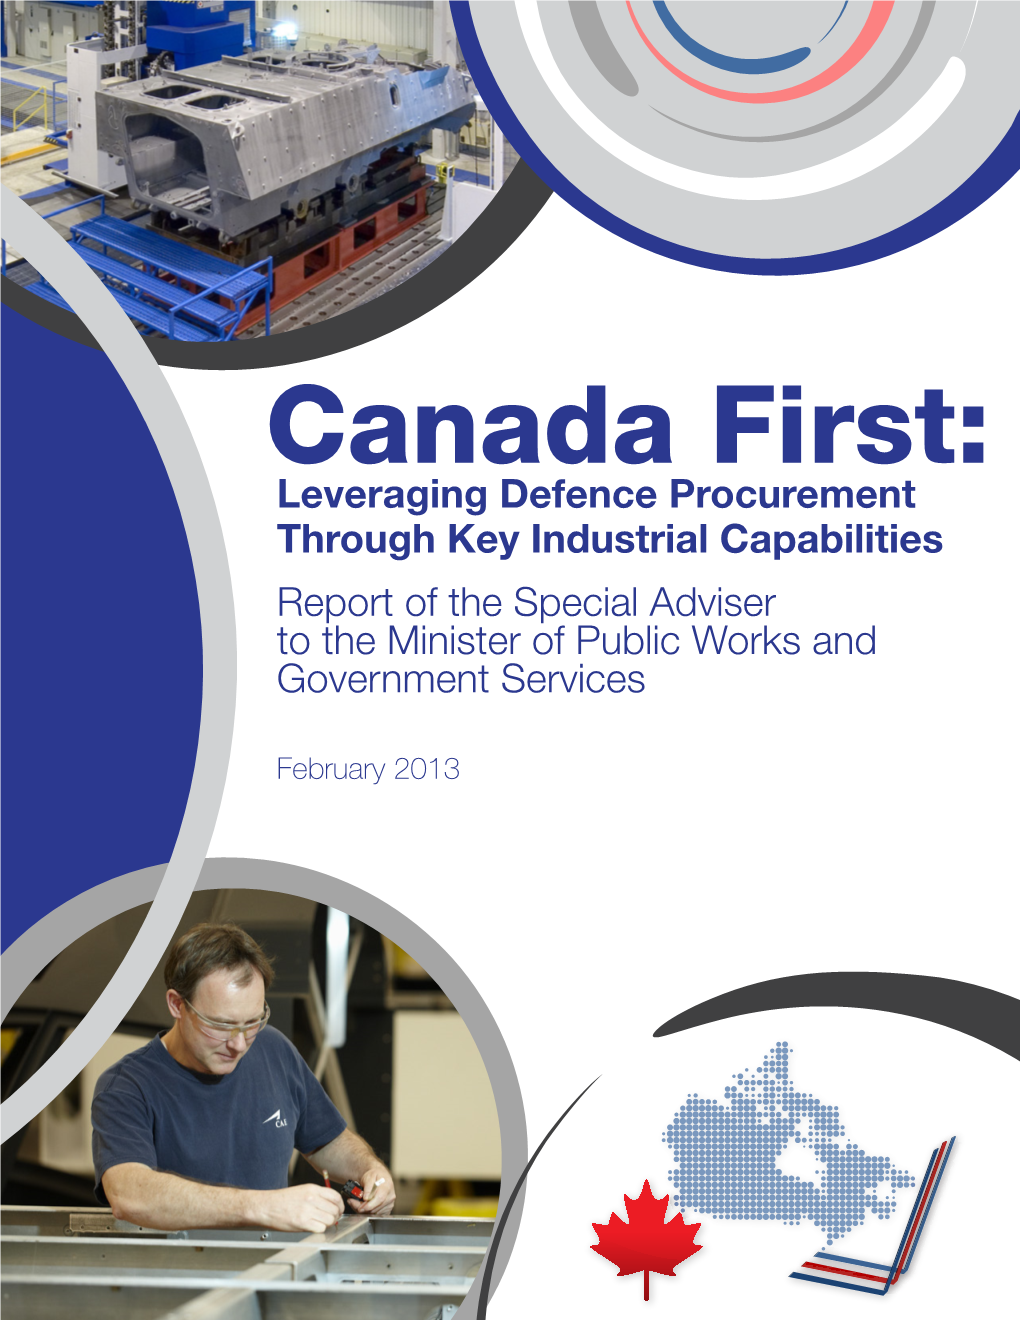 Canada First: Leveraging Defence Procurement Through Key